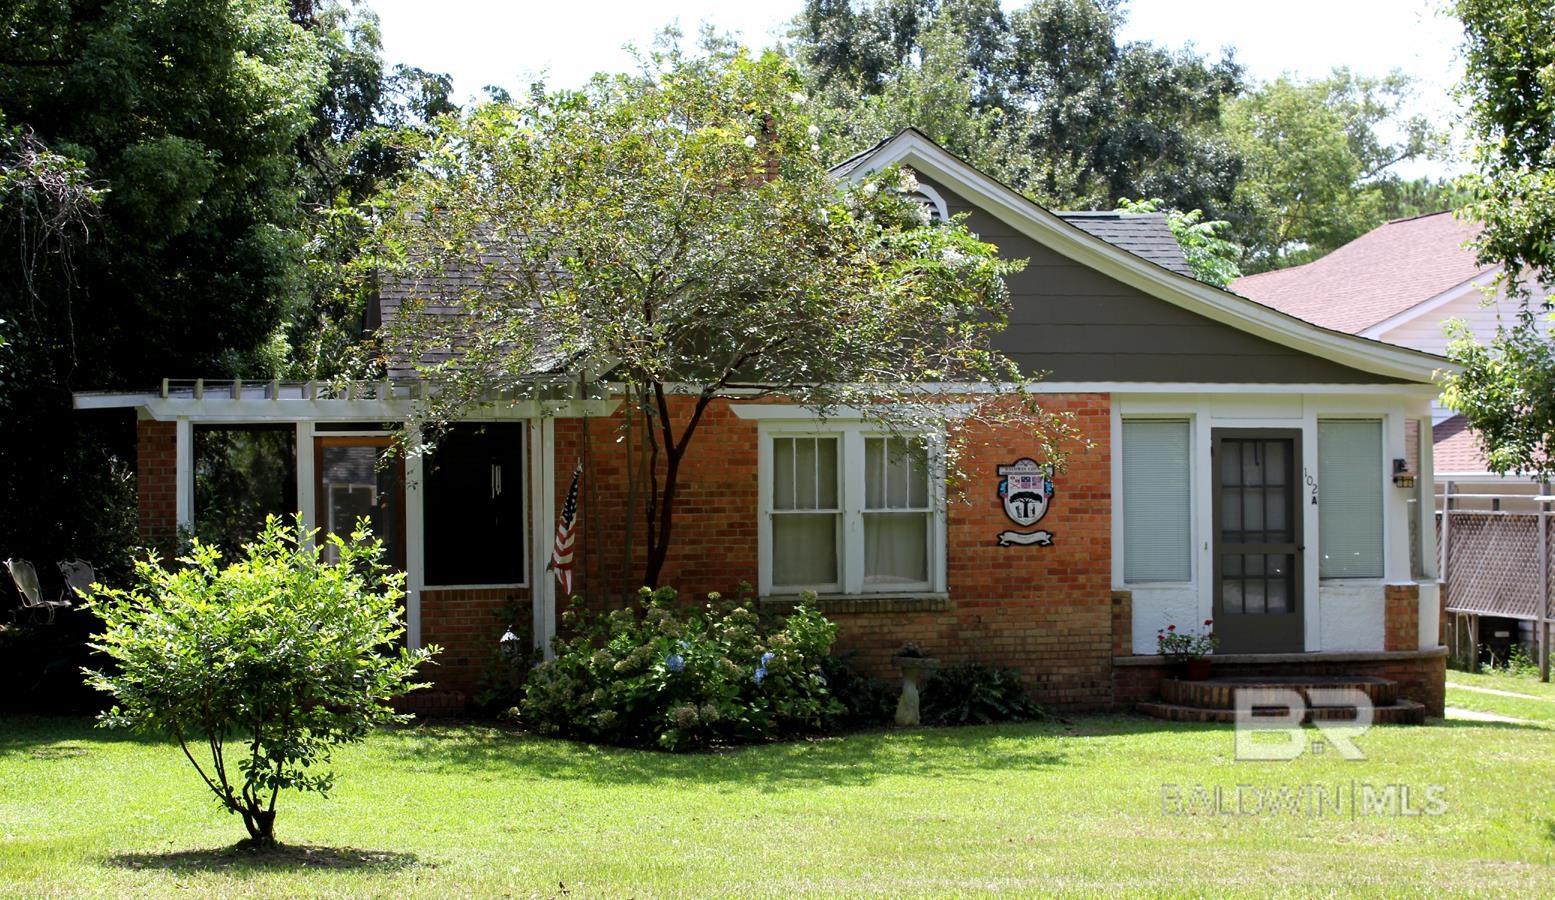 A unique find in Fairhope's popular Fruit and Nut neighborhood. Built in 1940, the Clay City Tile main house is 868 square feet, 2 bedroom, 1 bath.   The 432 square foot guest cottage is a 1/1.  Room dimensions are based on bedroom 1 and 2 in the main house, bedroom 3 and great room are in the guest cottage.